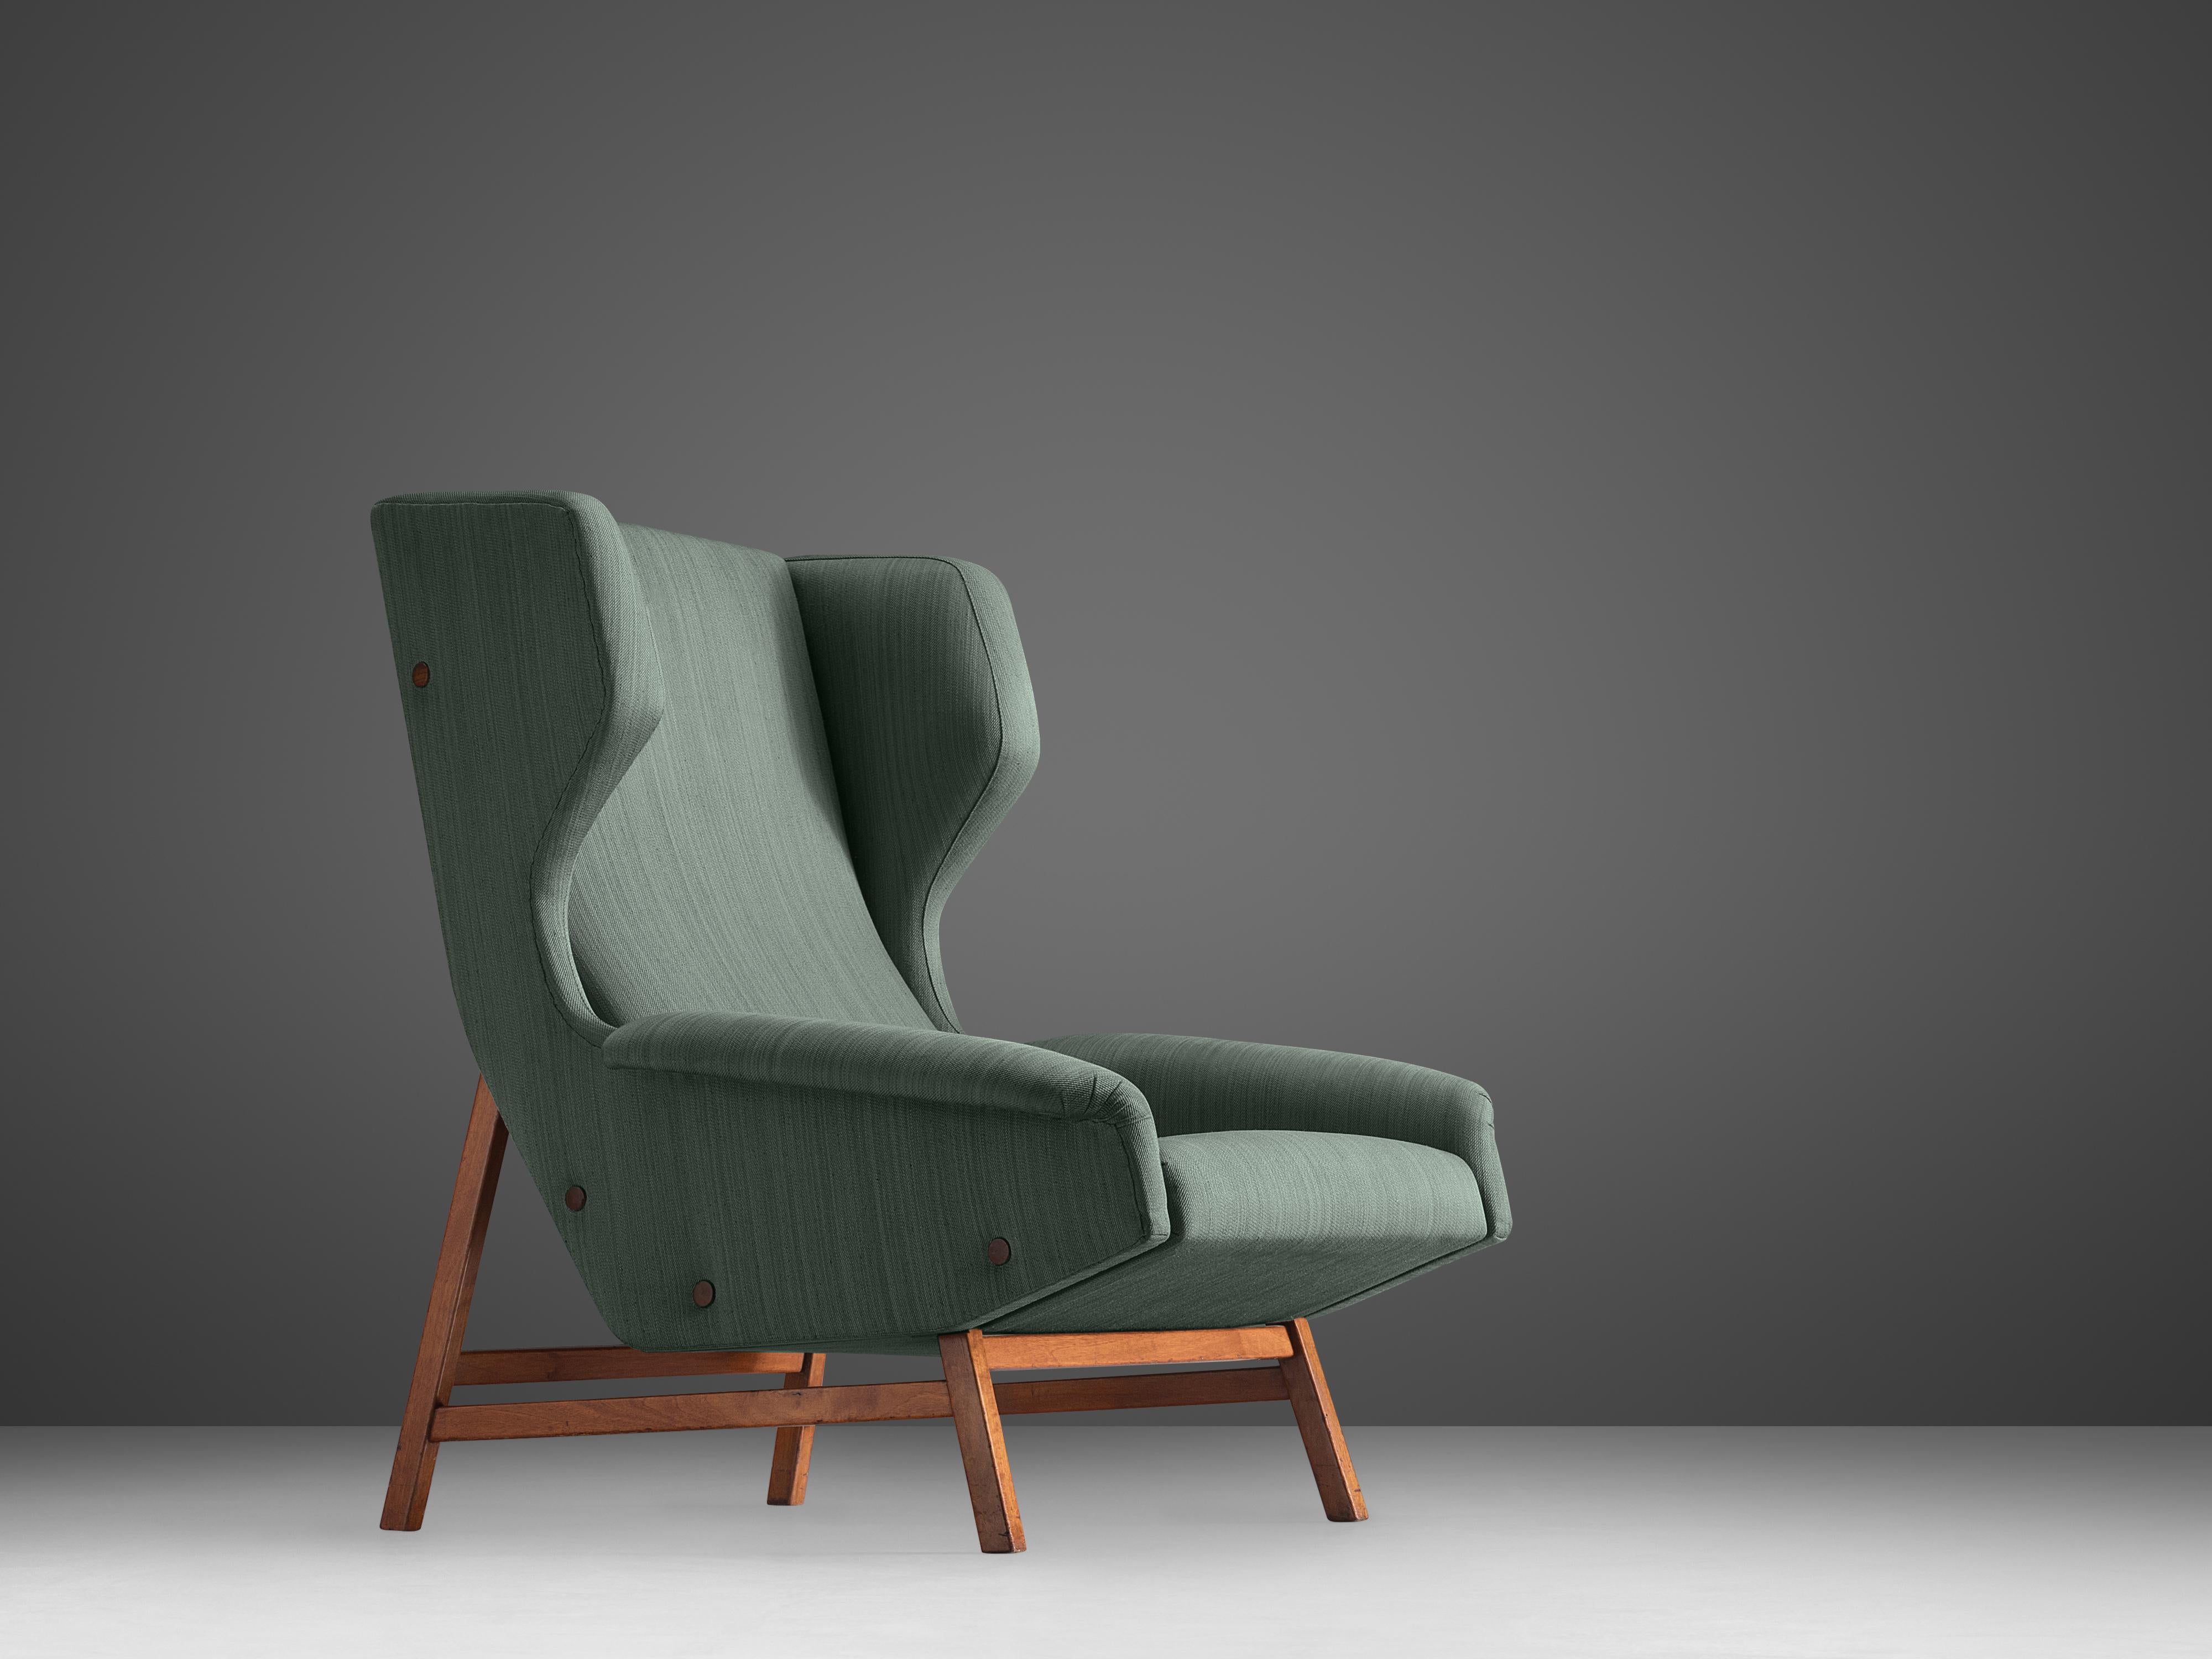 Gianfranco Frattini for Cassina, lounge chair model 877, fabric, teak, Italy, 1959

This grand lounge chair is based on a solid construction, featuring strict lines and angular shapes. While the seat convinces with its bulky and voluminous